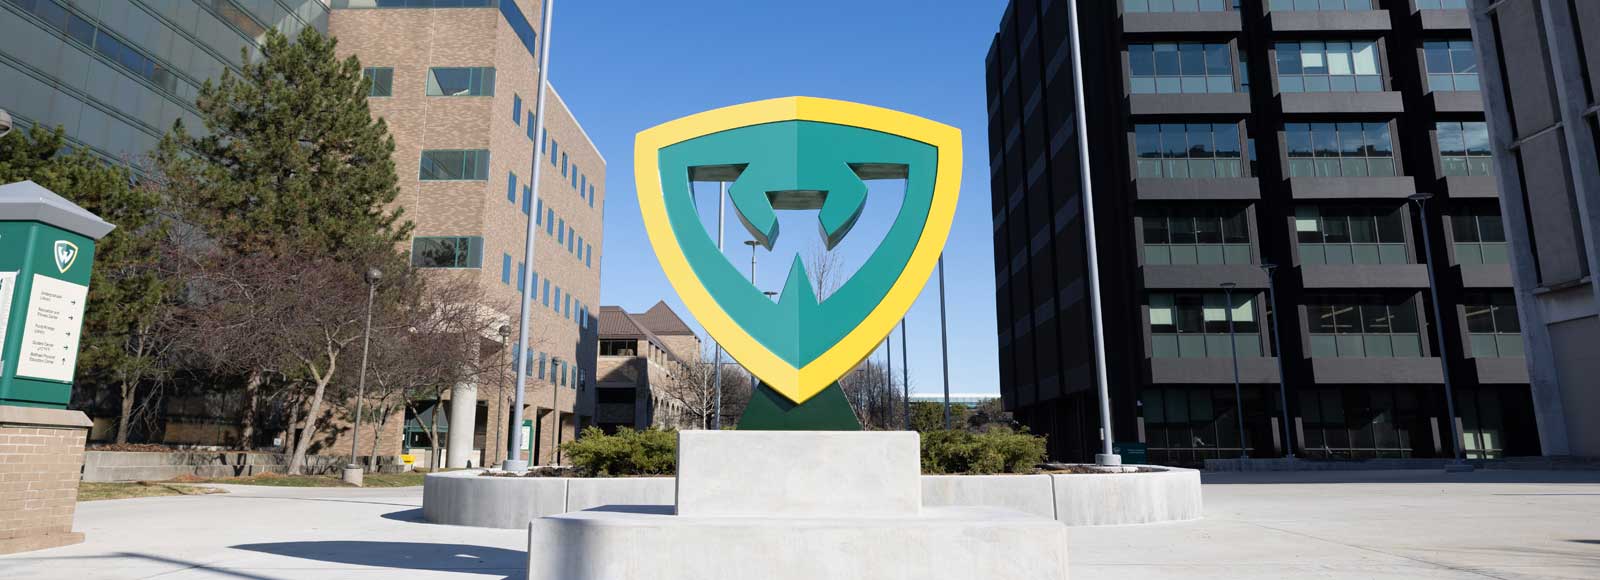 Photo of W sculpture on campus